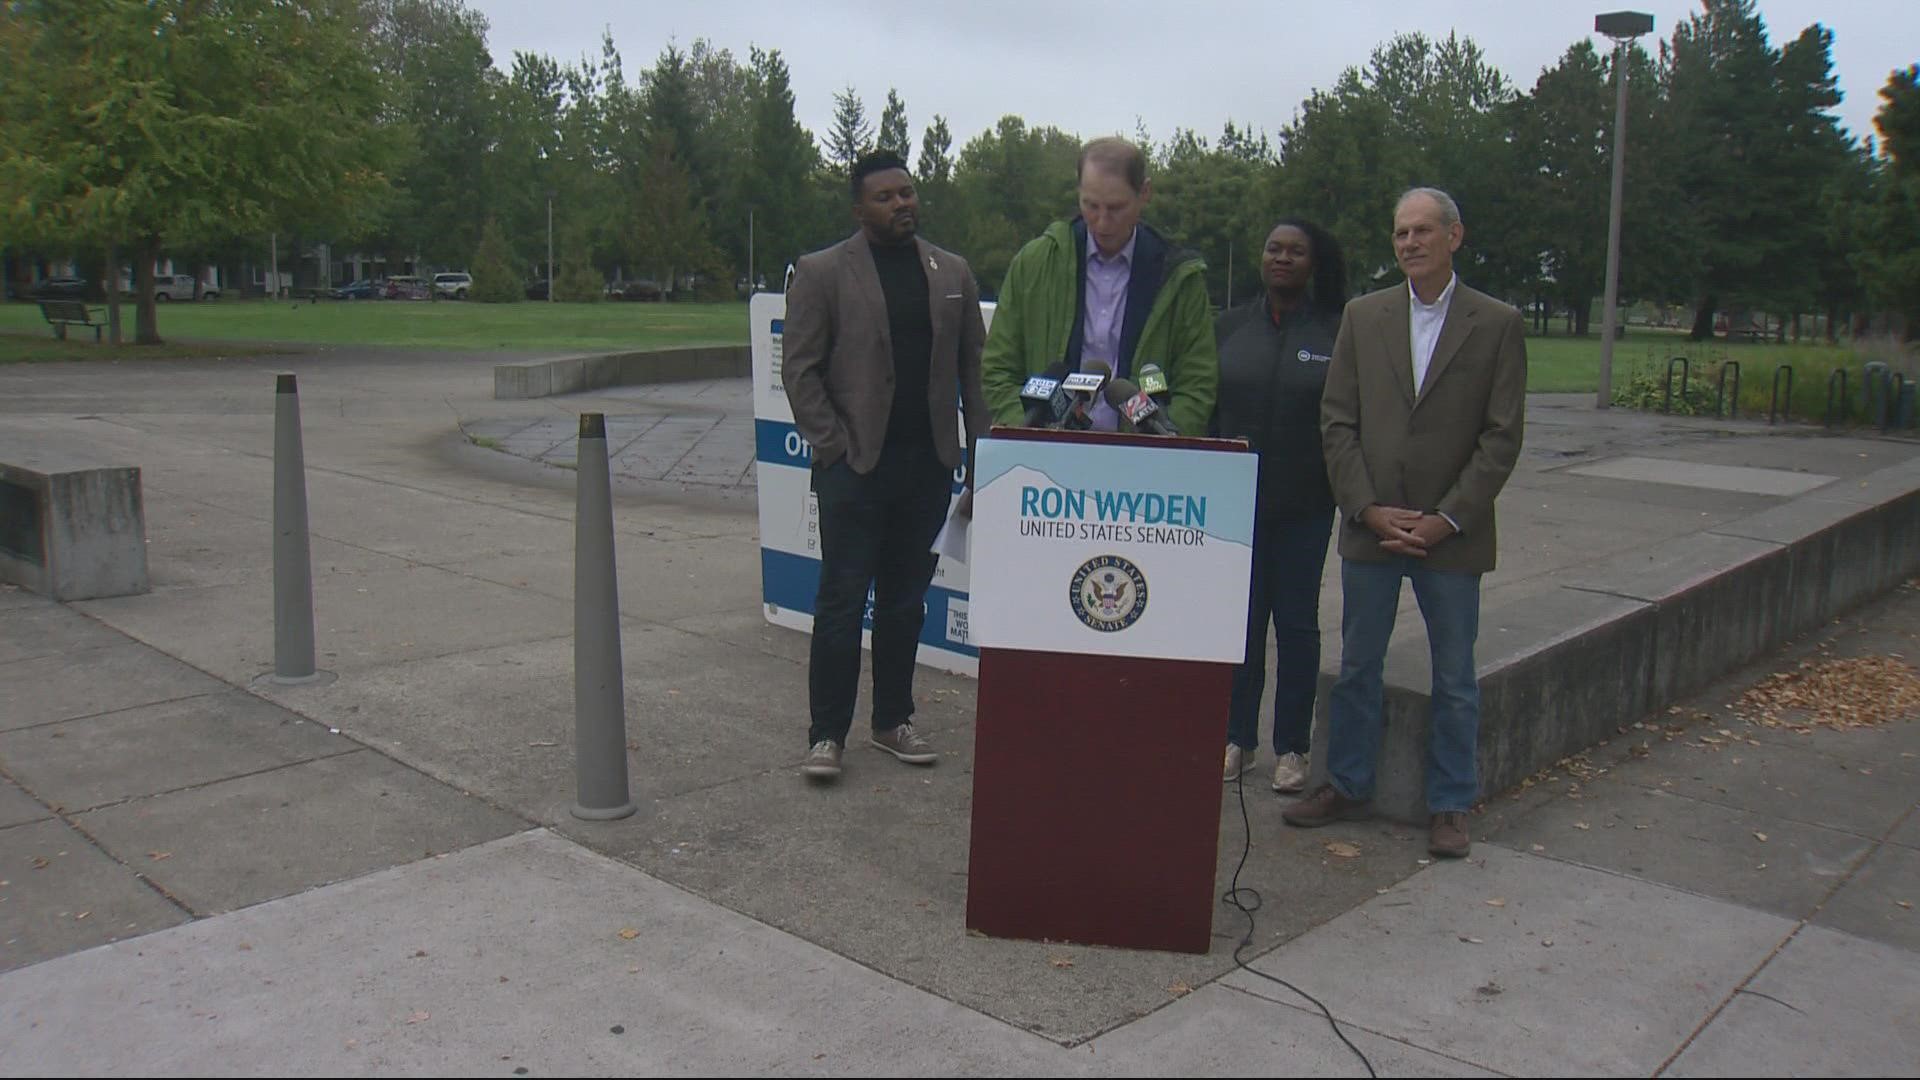 Current U.S. Senator and current candidate Ron Wyden speaks on voting rights with the upcoming election.